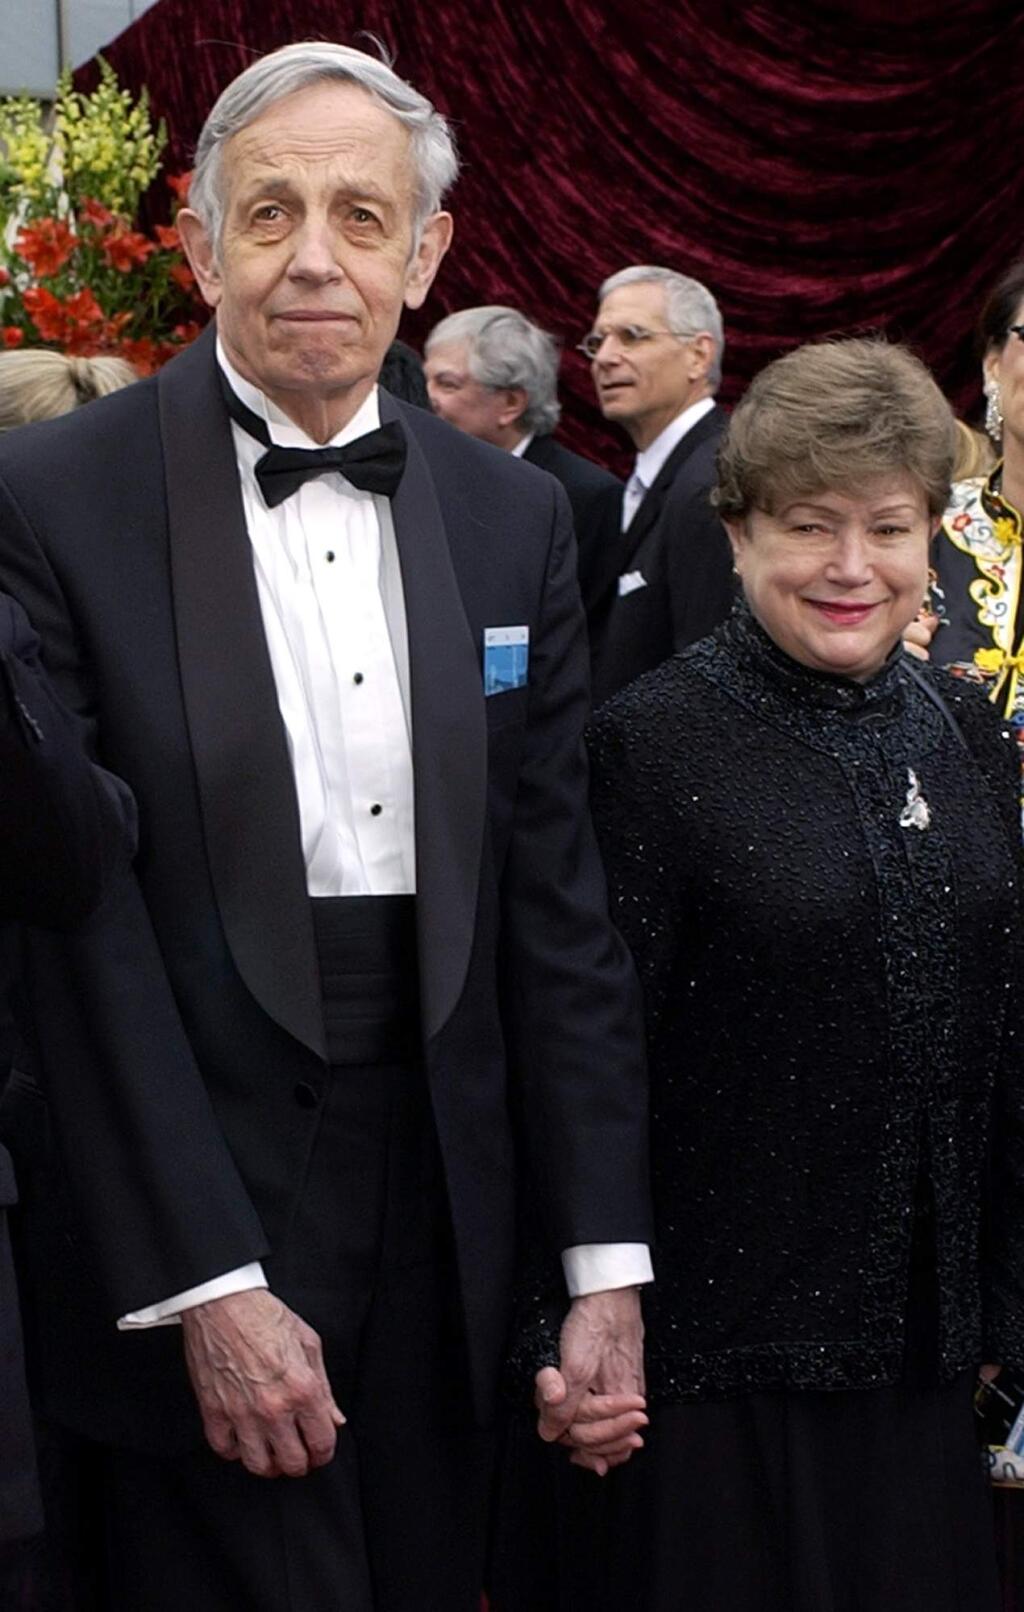 FILE - In this March 24, 2002 file photo, John Nash, left, and his wife Alicia, arrive at the 74th annual Academy Awards, in Los Angeles. Nash, the Nobel Prize-winning mathematician whose struggle with schizophrenia was chronicled in the 2001 movie 'A Beautiful Mind,î died in a car crash along with his wife in New Jersey on Saturday, May 23, 2015, police said. (AP Photo/Laura Rauch, File)